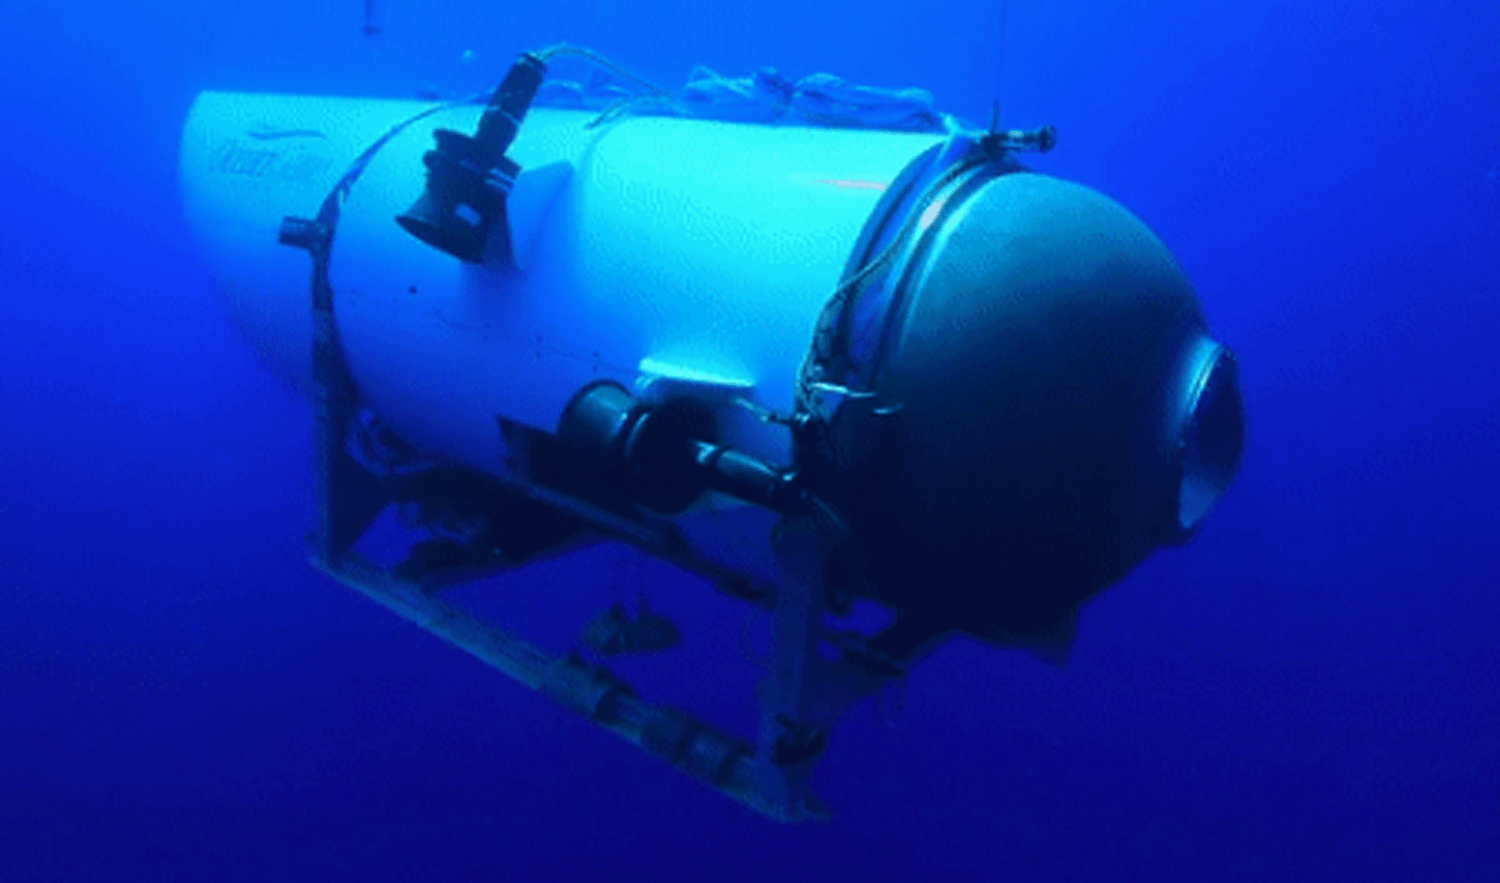 Titanic submersible lost at sea raises legal questions for high-risk  businesses